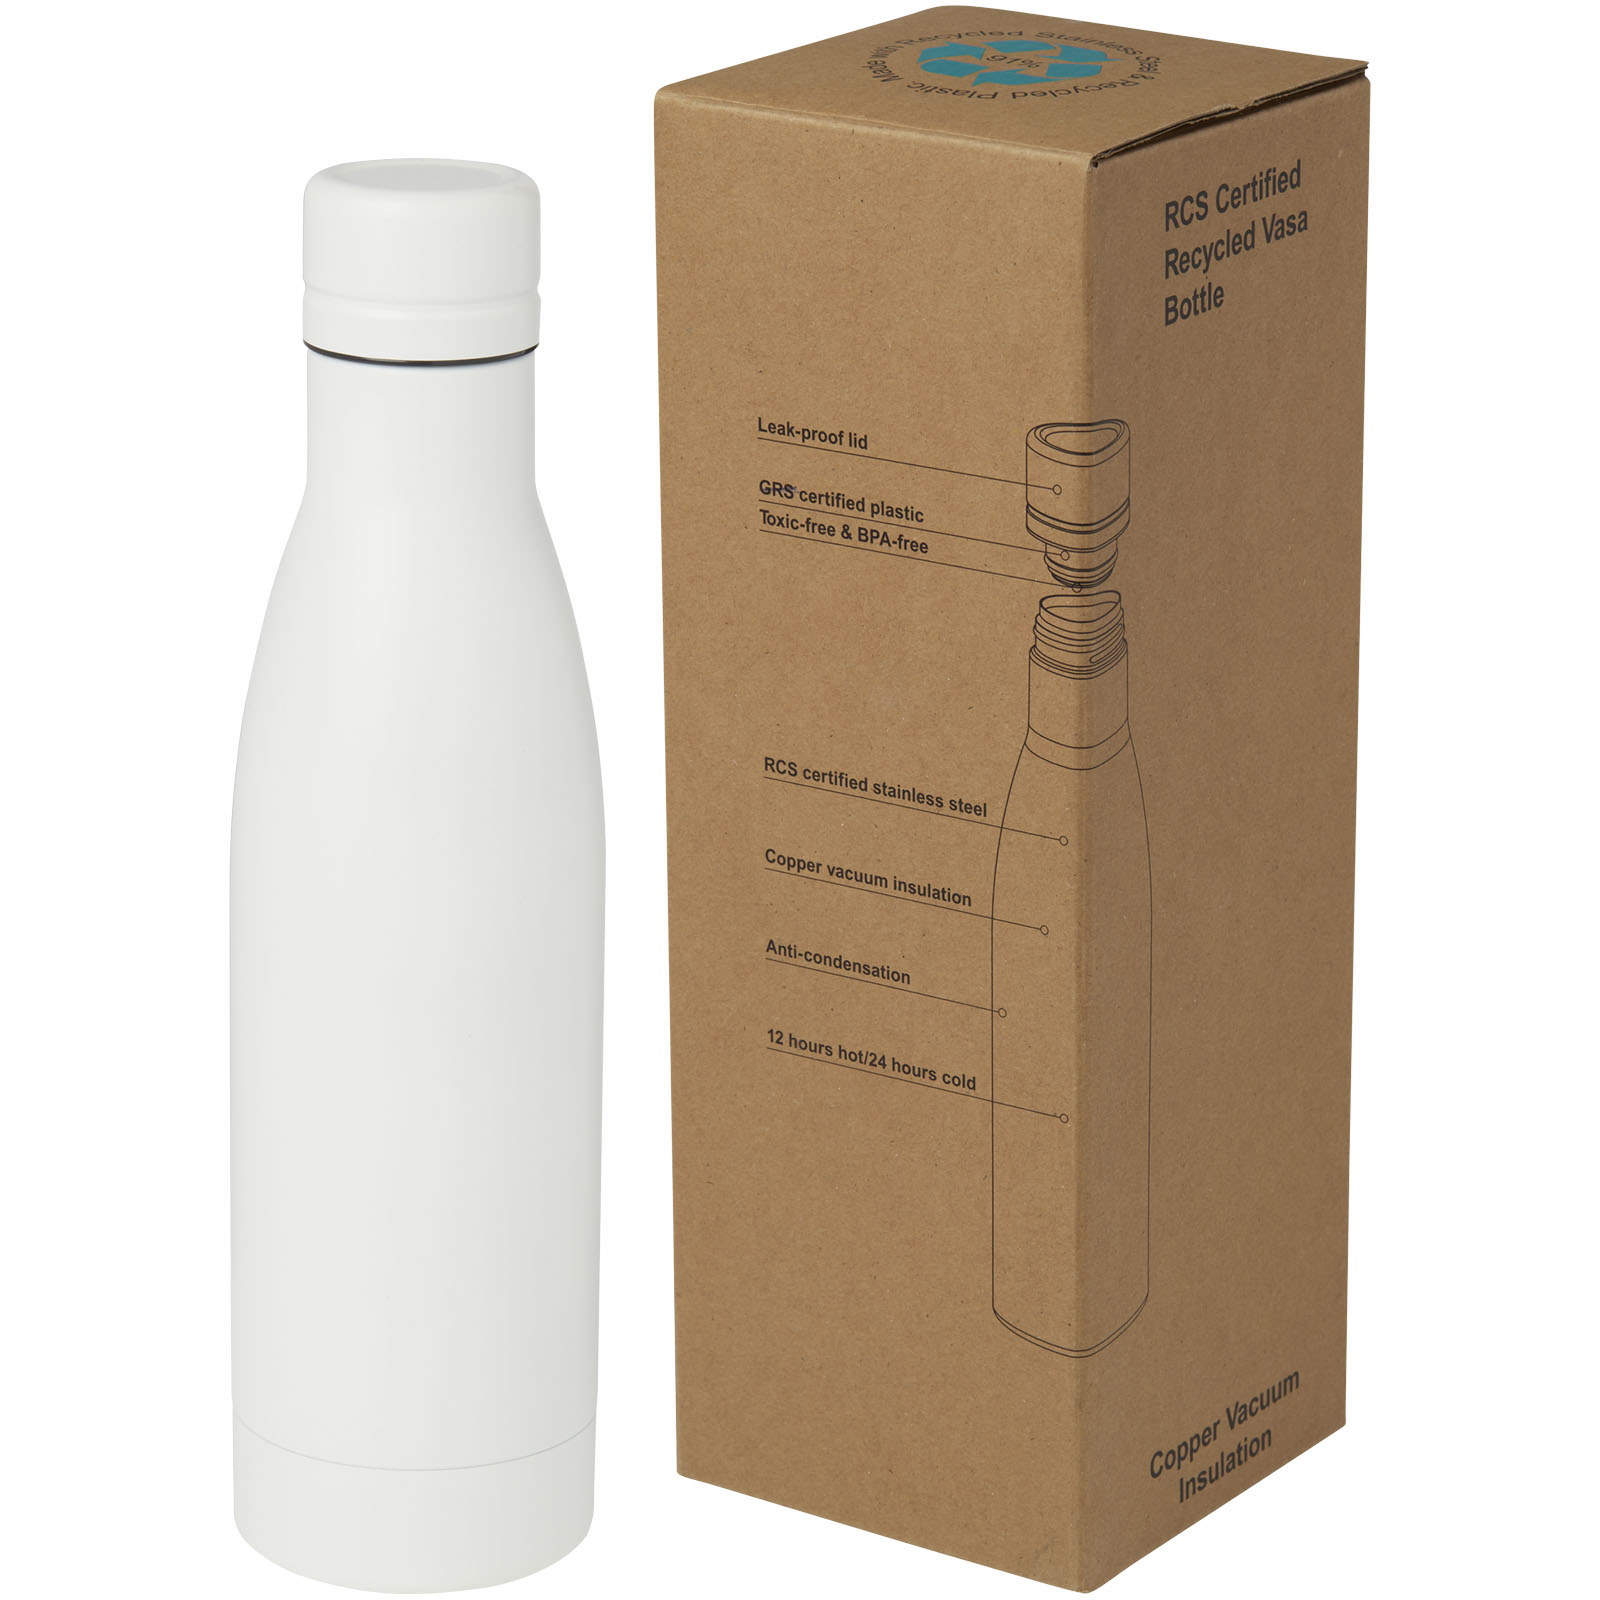 Drinkware - Vasa 500 ml RCS certified recycled stainless steel copper vacuum insulated bottle